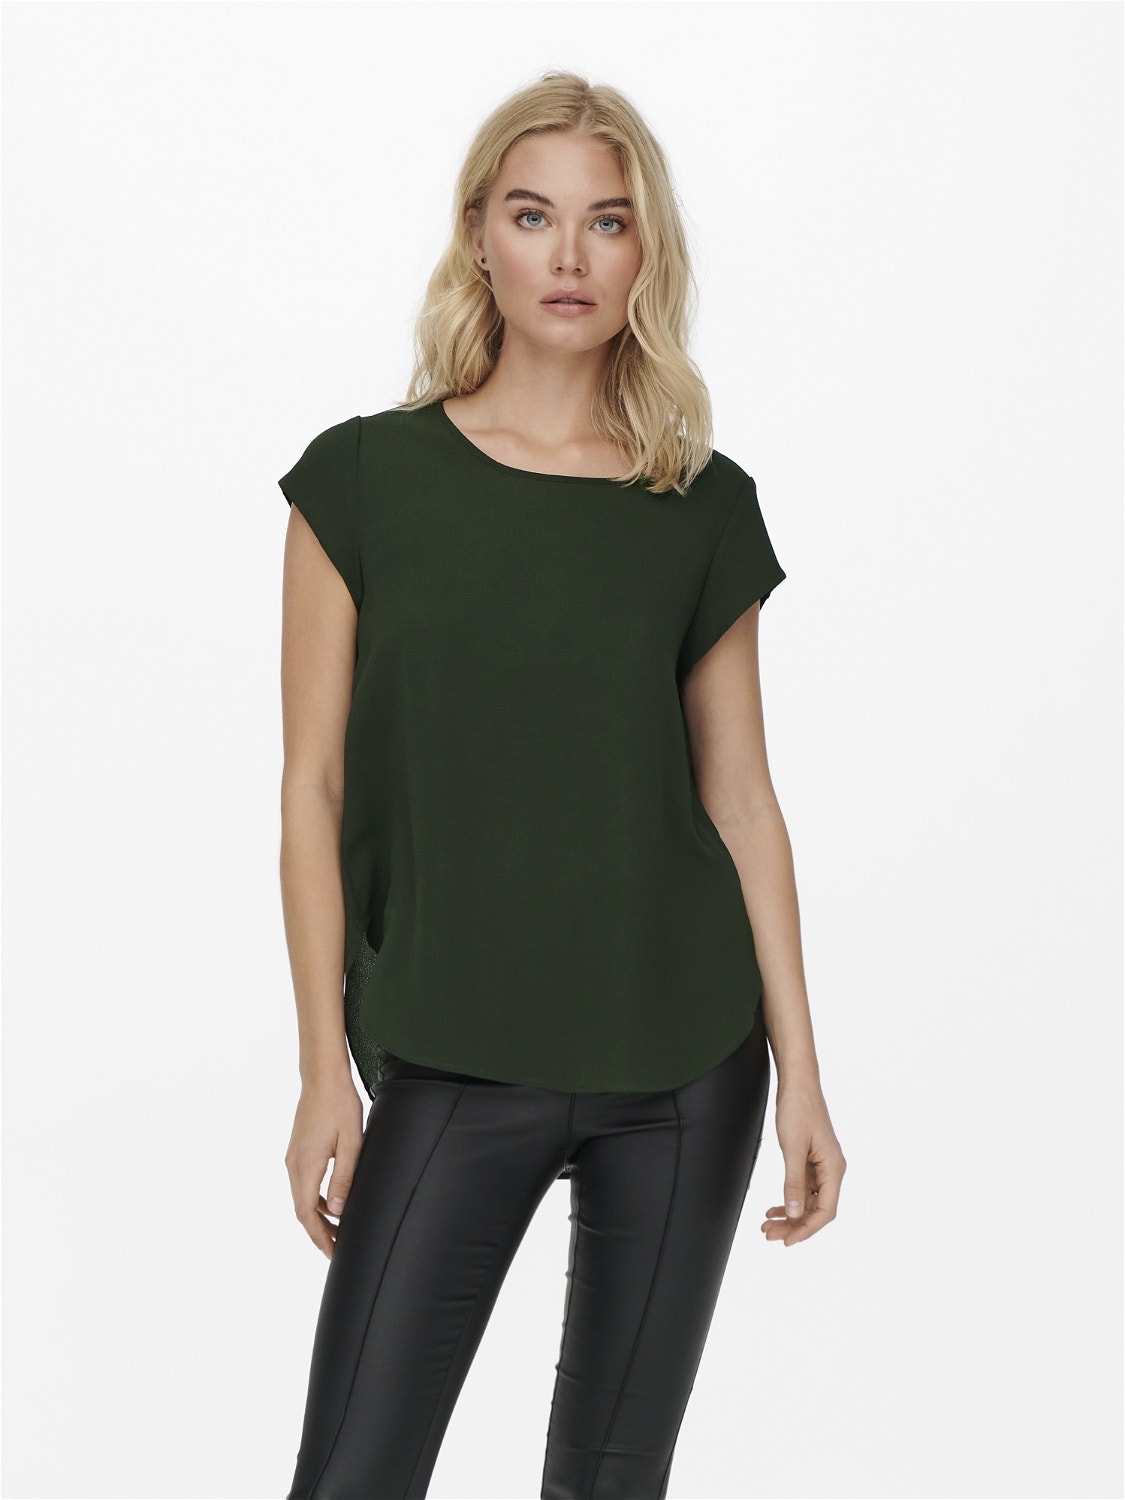 ONLY Loose Short Sleeved Top -Rosin - 15142784